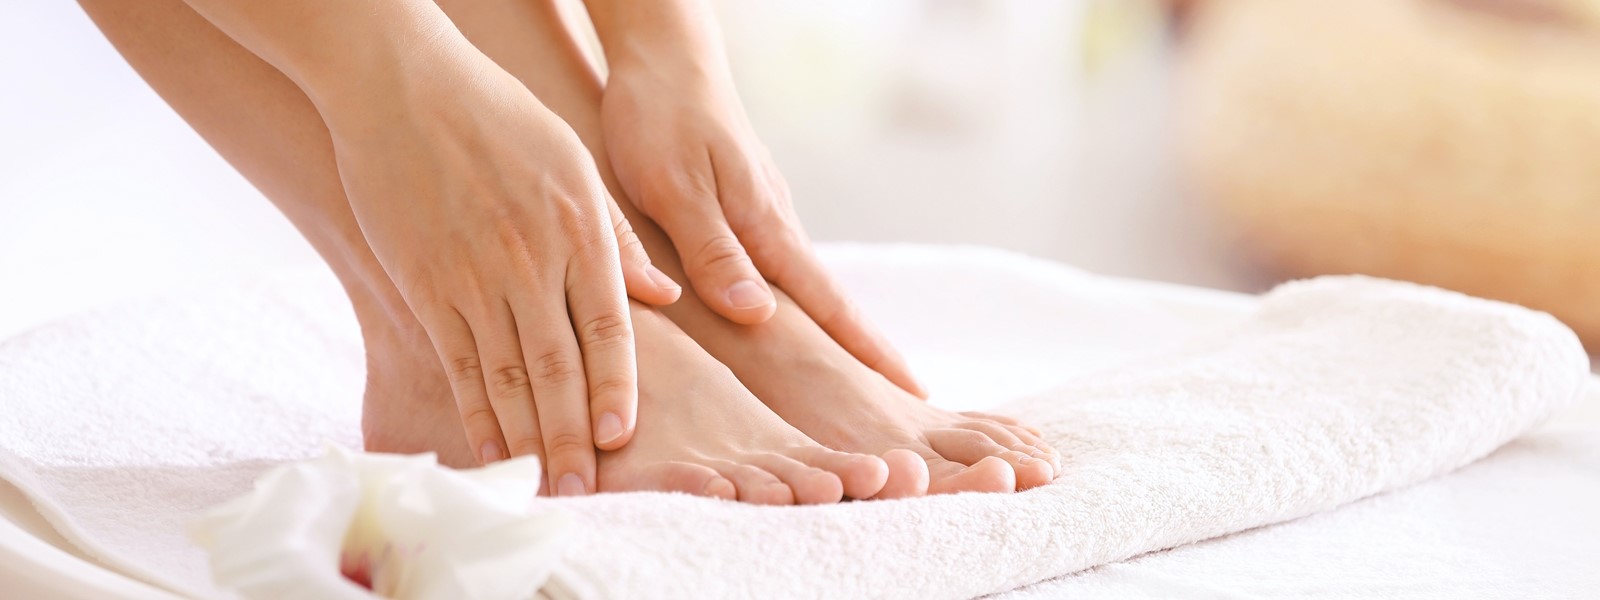 Hands massaging their own bare feet on a white towel